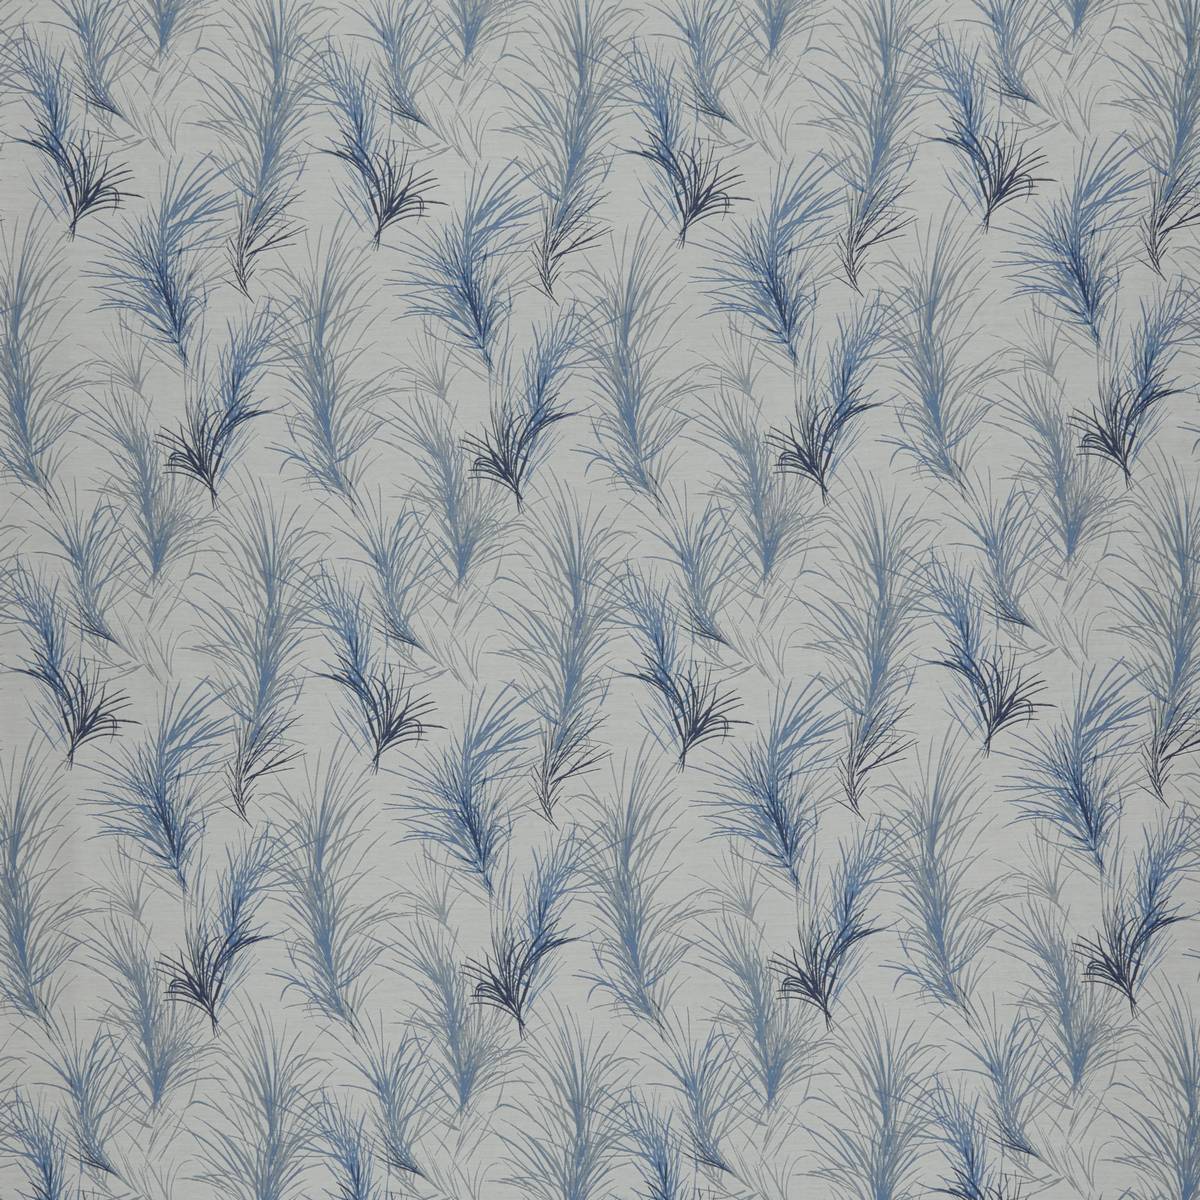 Feather Boa Midnight Fabric by iLiv